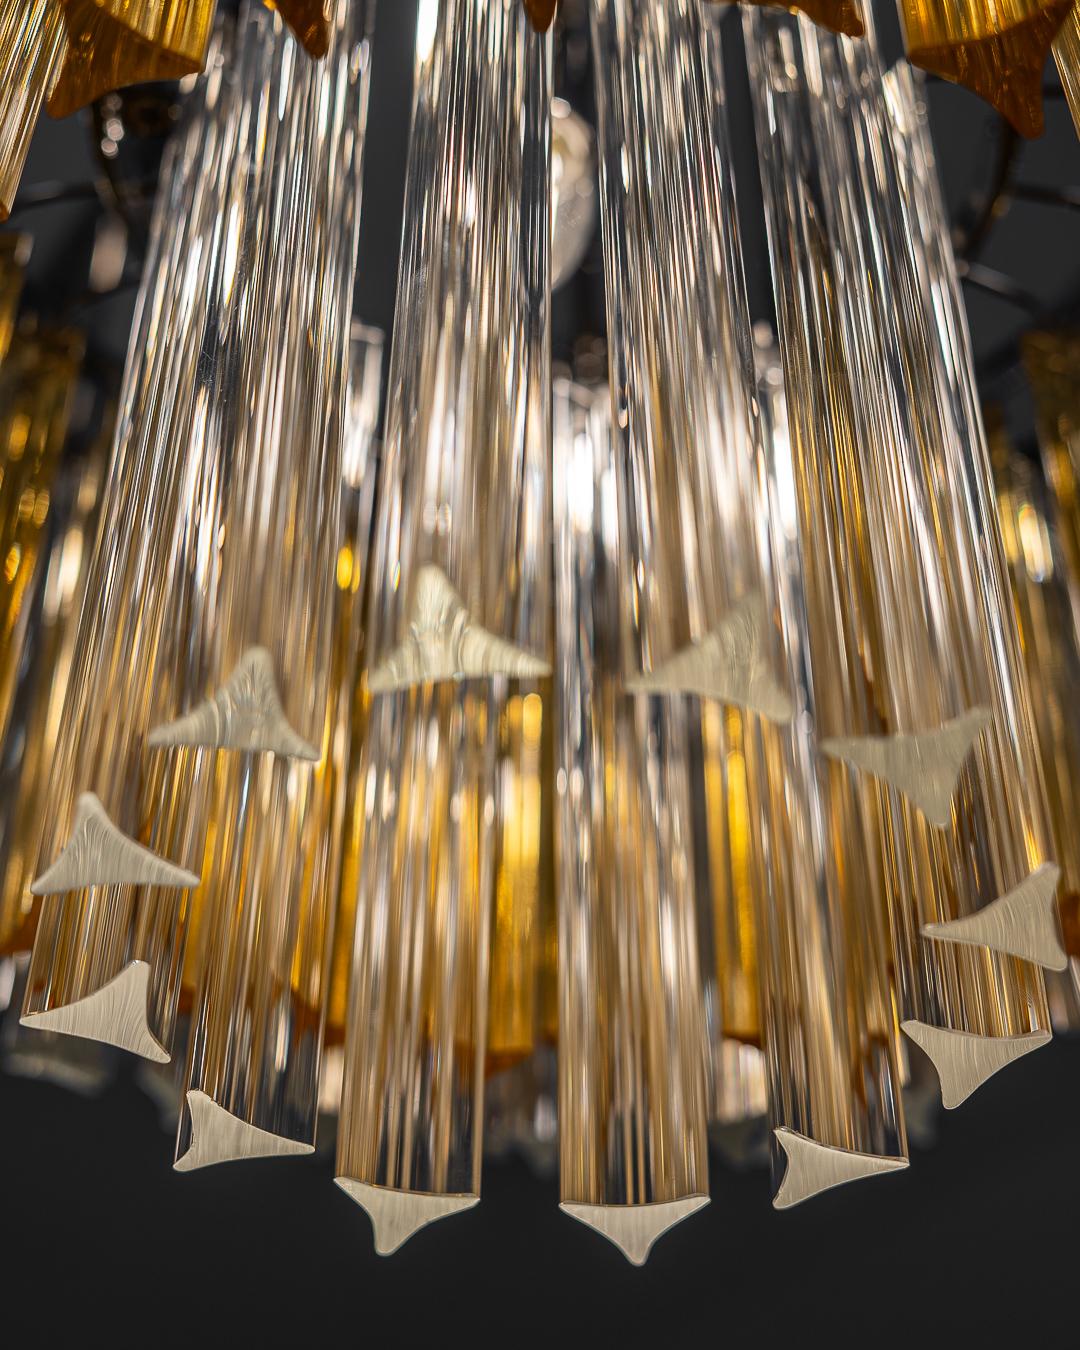 Beautiful chandelier made entirely by hand and designed by the great designer Jules LELEU. Jules is one of the pioneers and one of the great names in decorative art from 1910 to 1973.

The LELEU style has since become a signature, one of the most